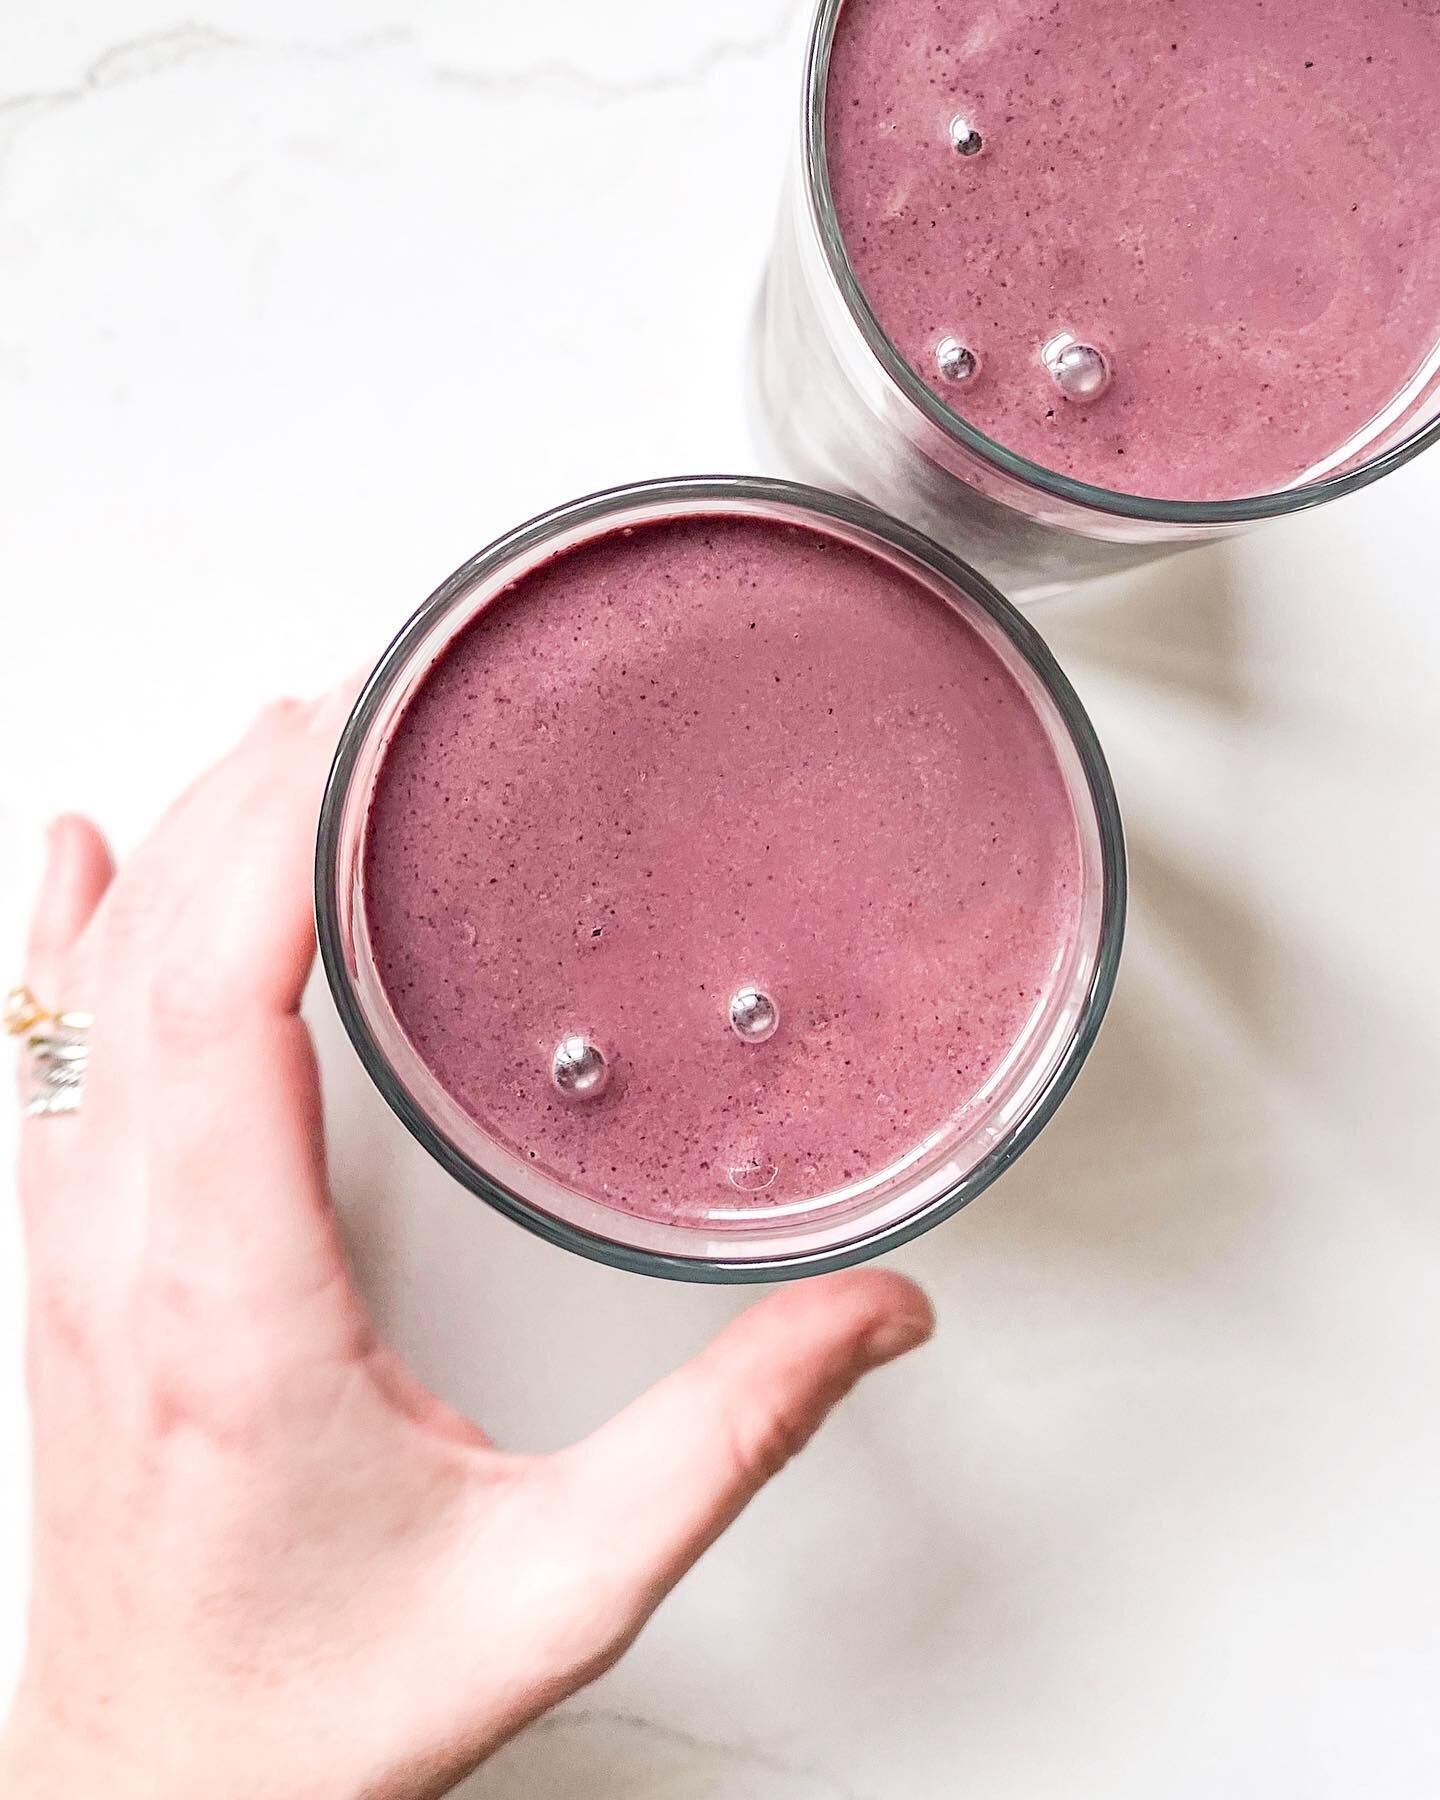 Lately Aaron and I have been LOVING this Blueberry Cacao Smoothie. Save this post for the quick recipe!

Blueberry Cacao Smoothie🫐🍫
Makes 2 smoothies.
- 1.5 c almond milk
- 1 lg handful of spinach
- 1/2 frozen banana
- 1.5 c frozen wild blueberries